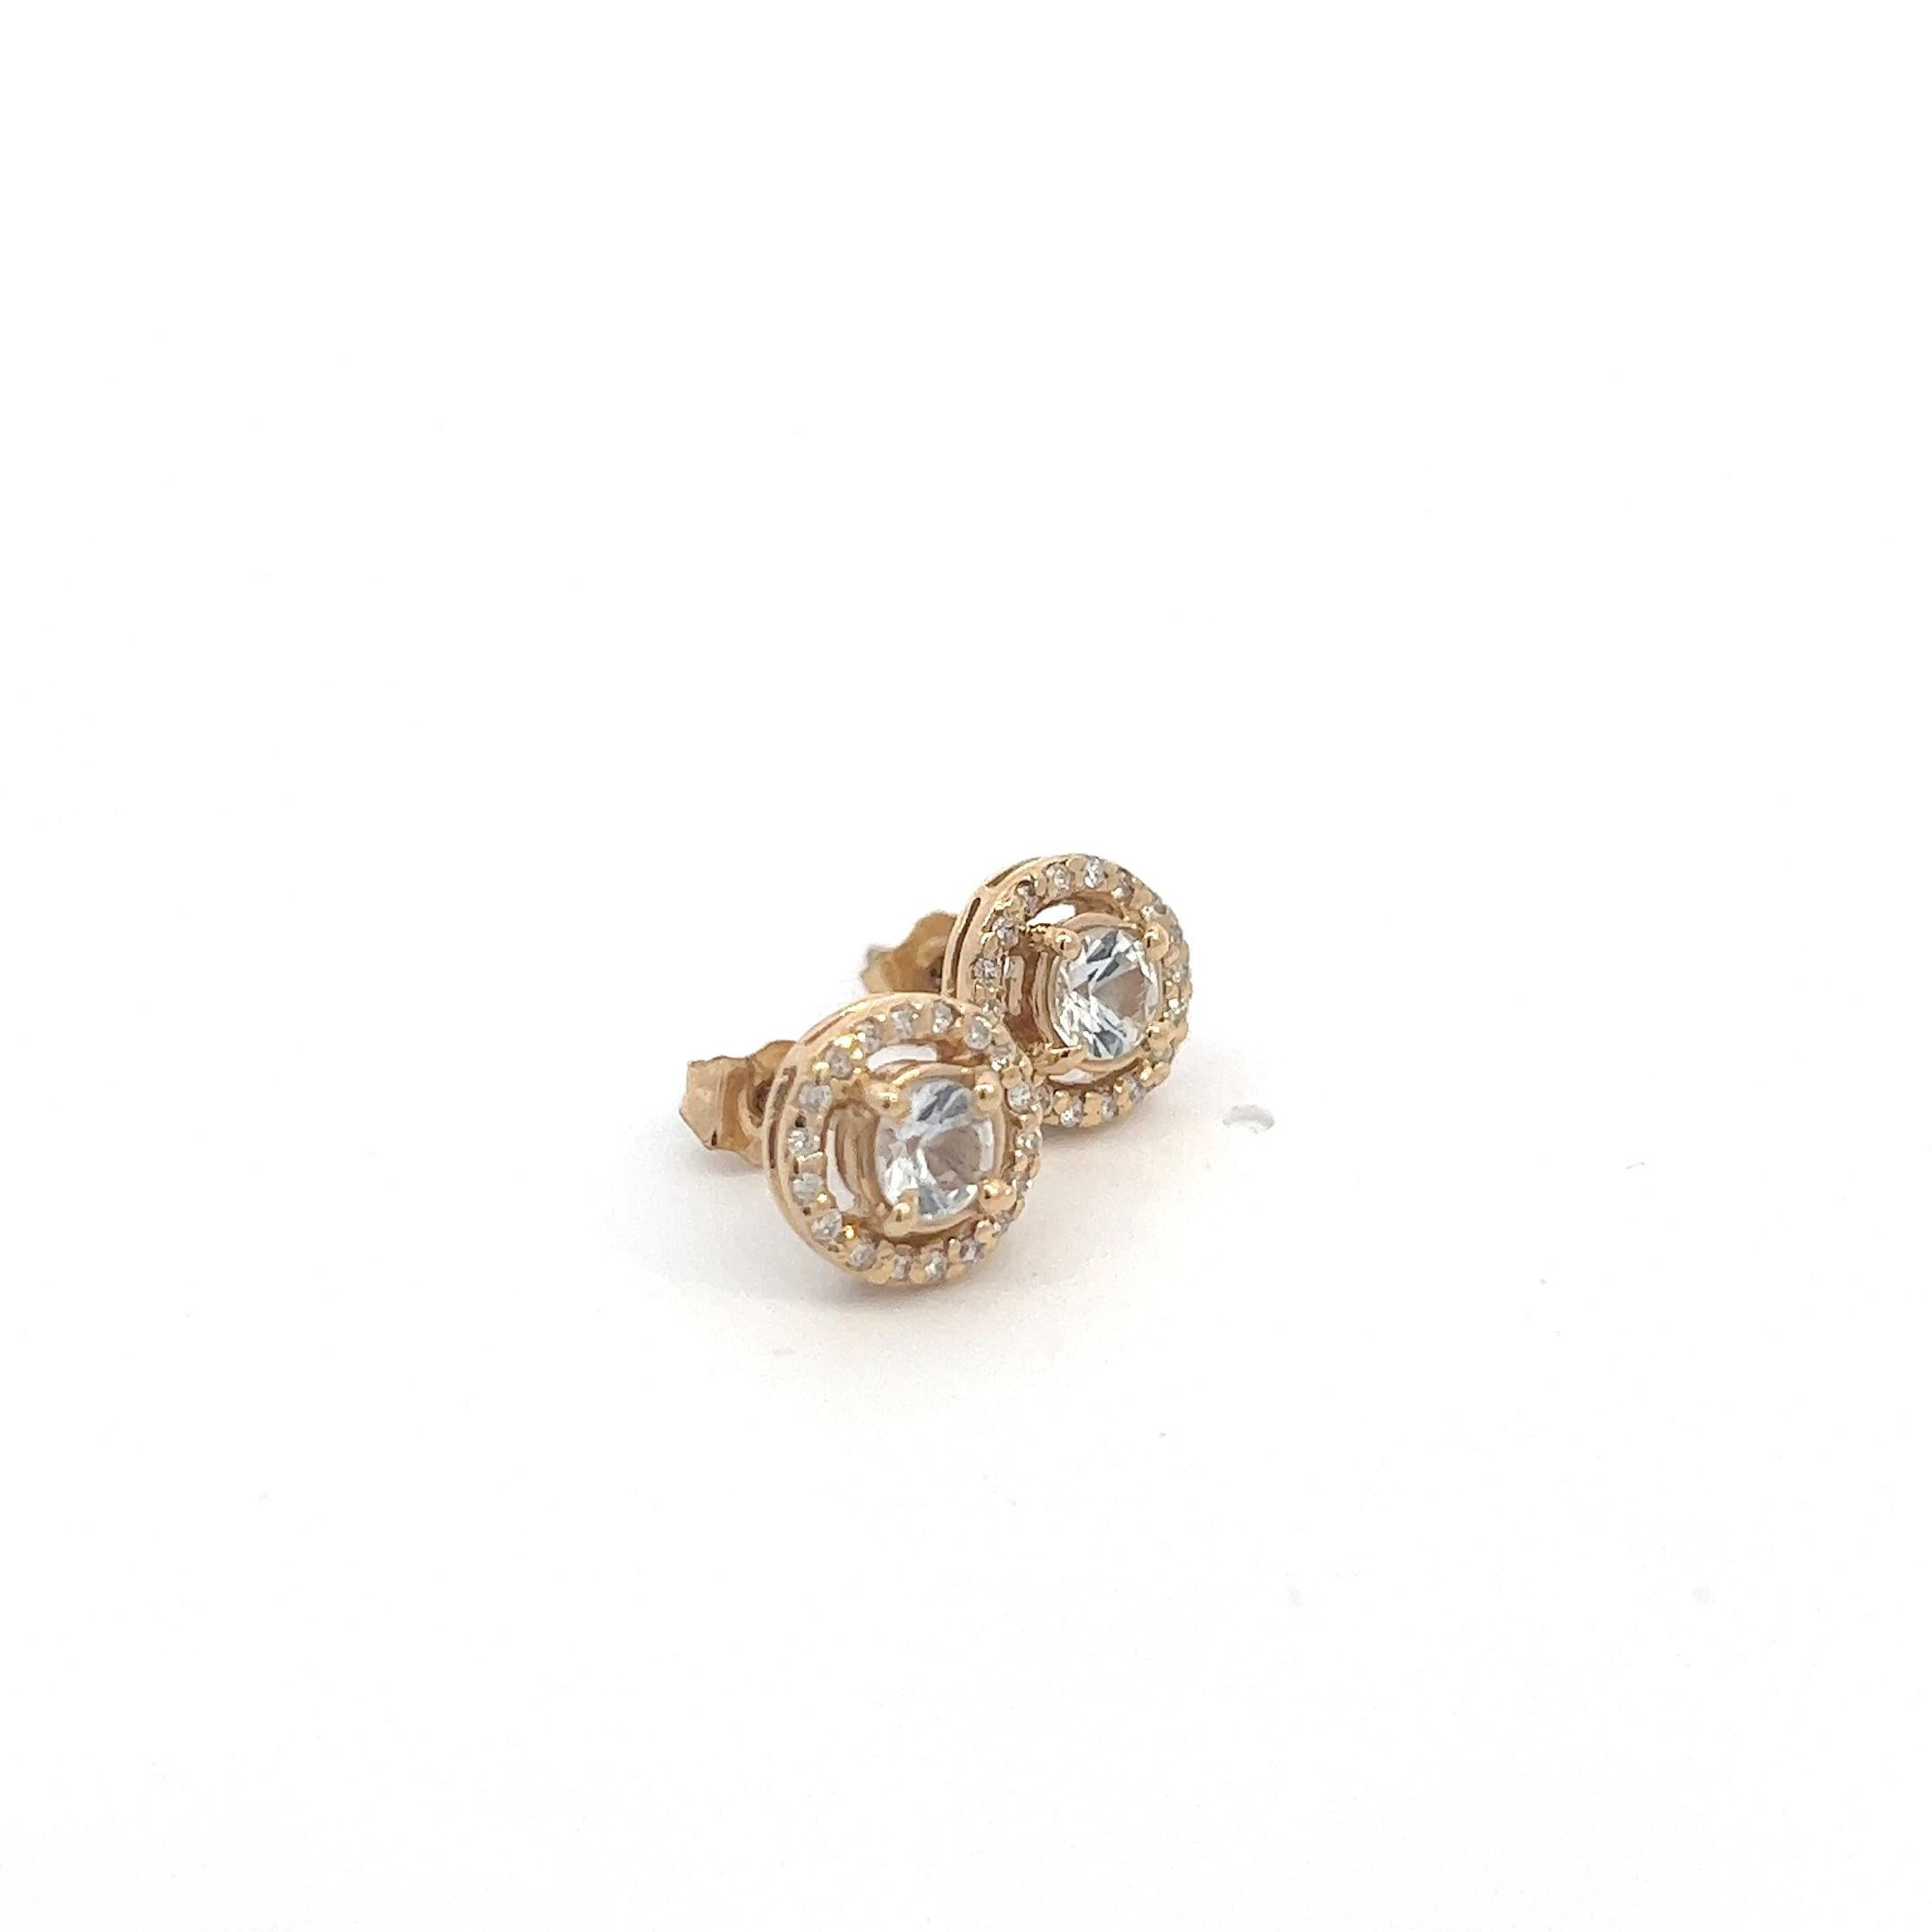 Natural White Sapphire Diamond Stud Earrings 14k Yellow Gold 0.97 TCW Certified For Sale 2